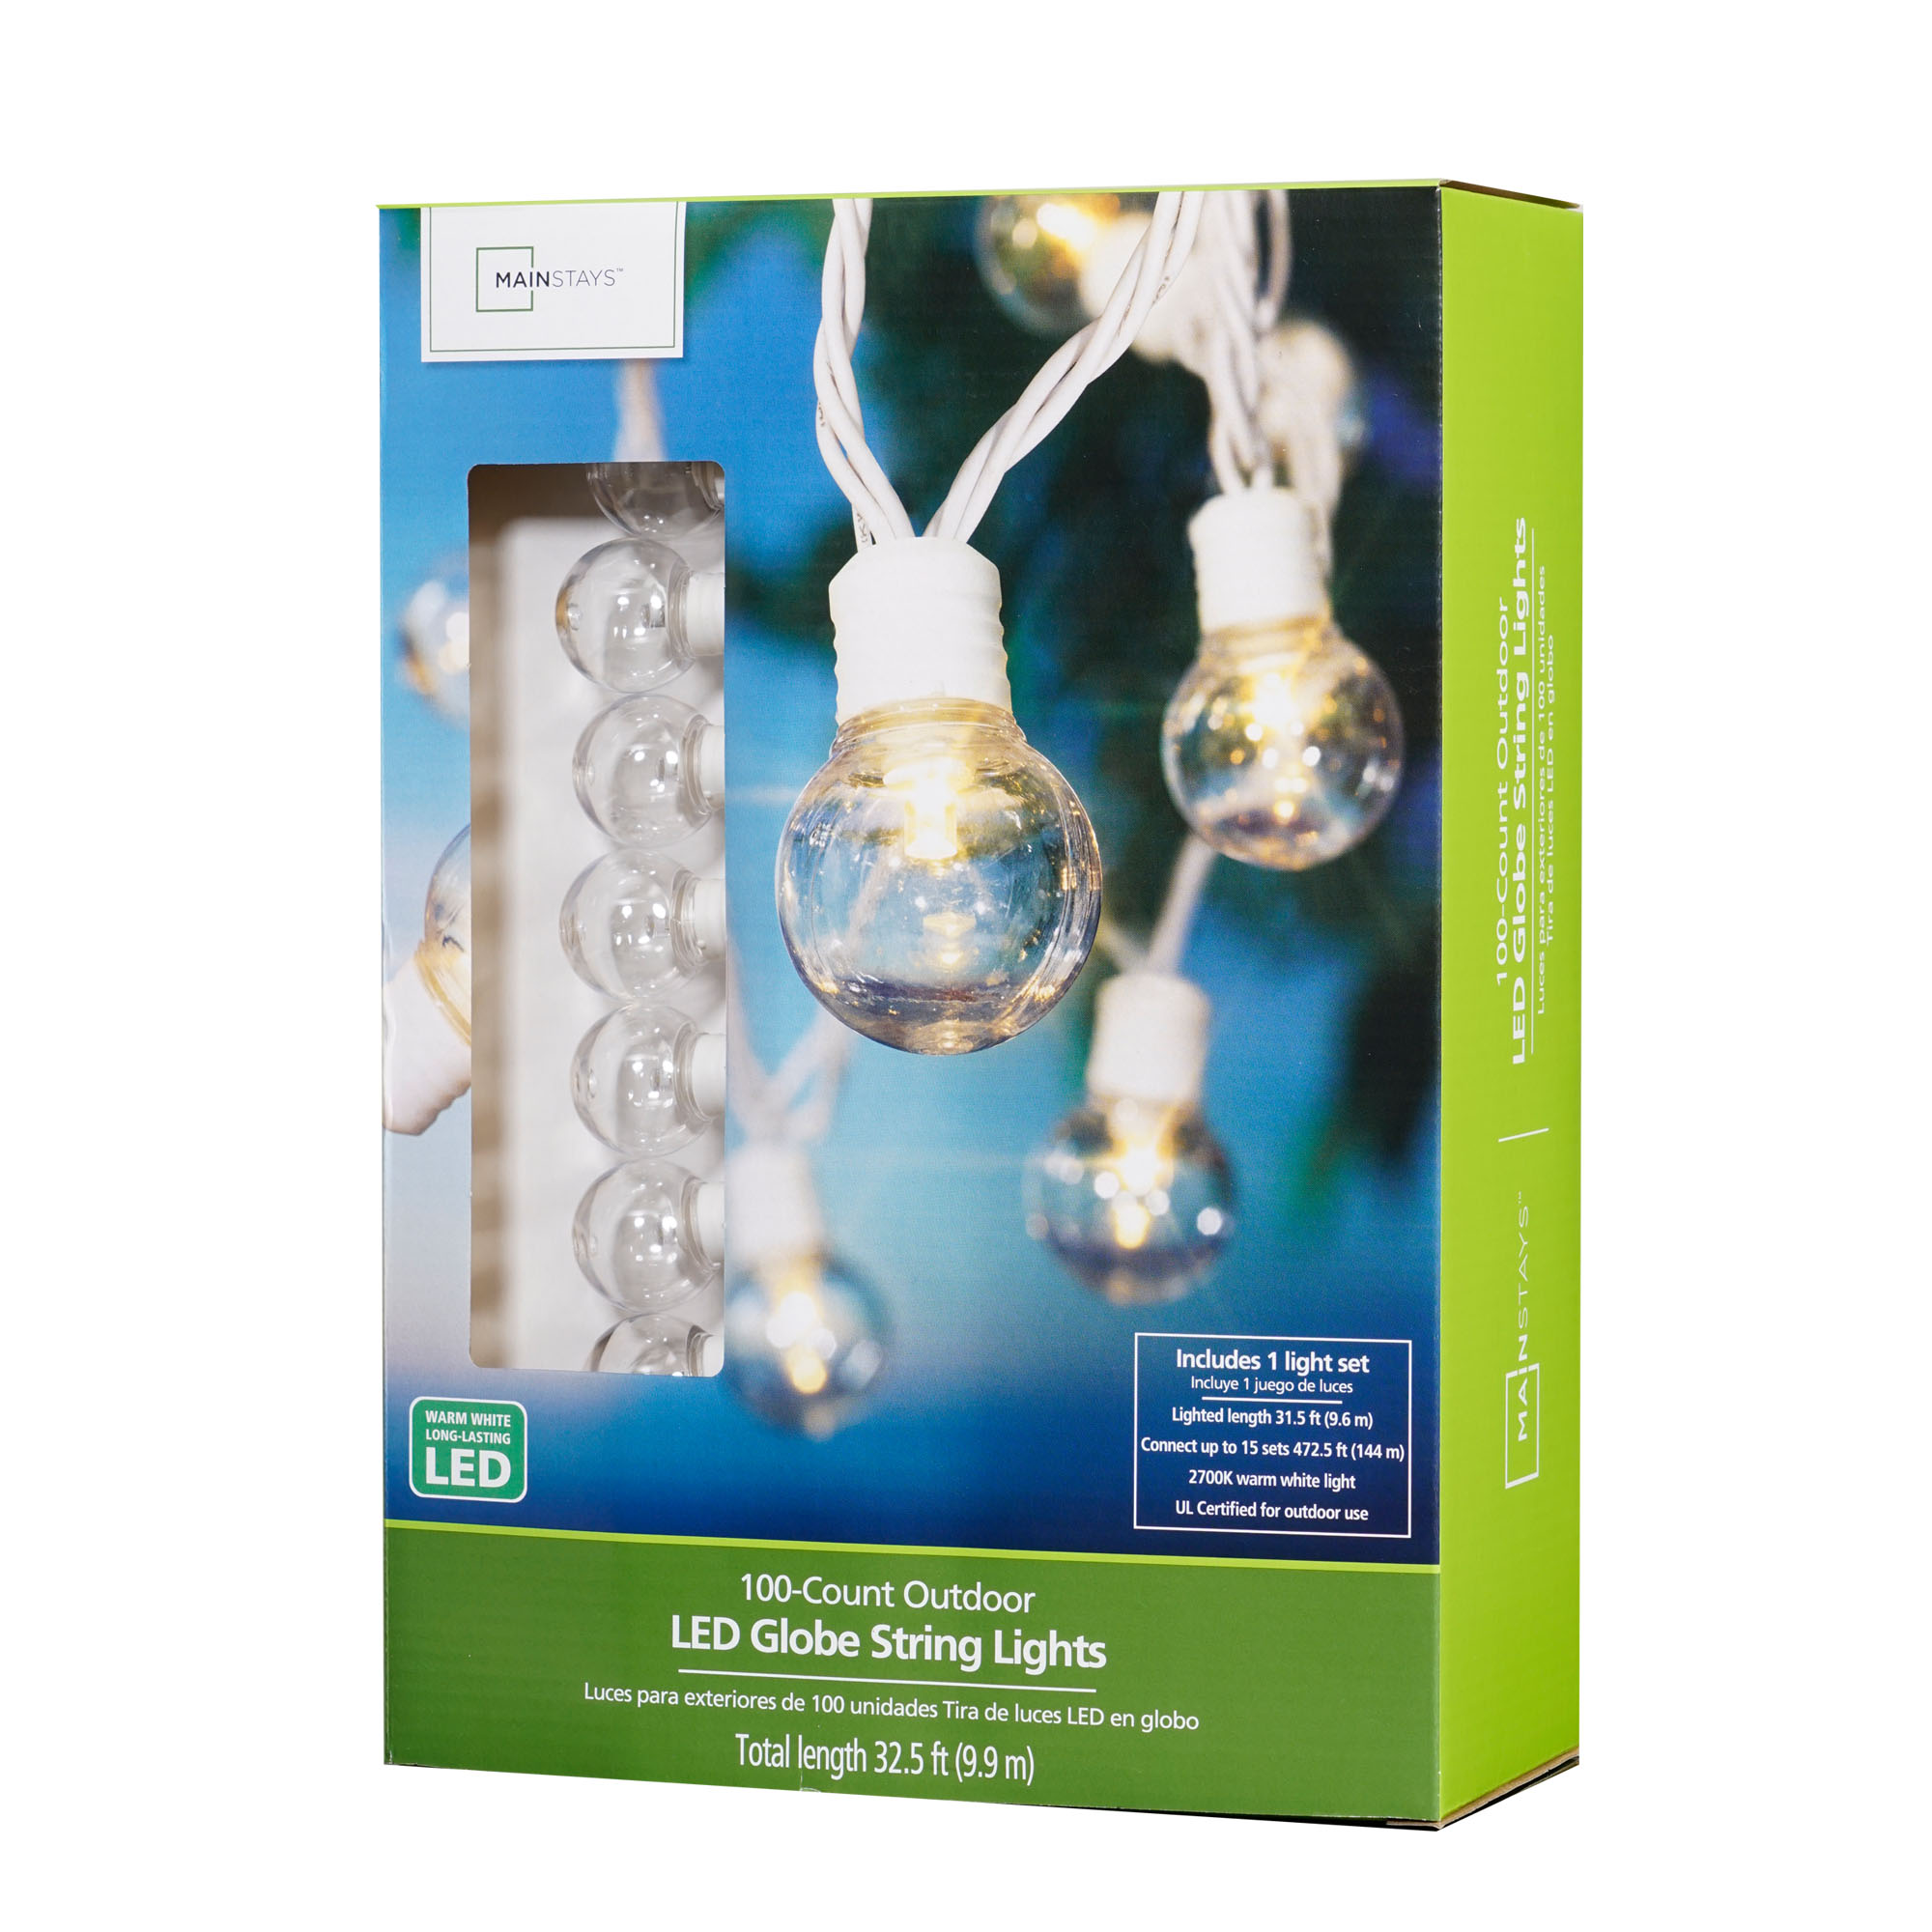 Mainstays 100-Count Plastic LED Globe Outdoor String Lights - image 8 of 9